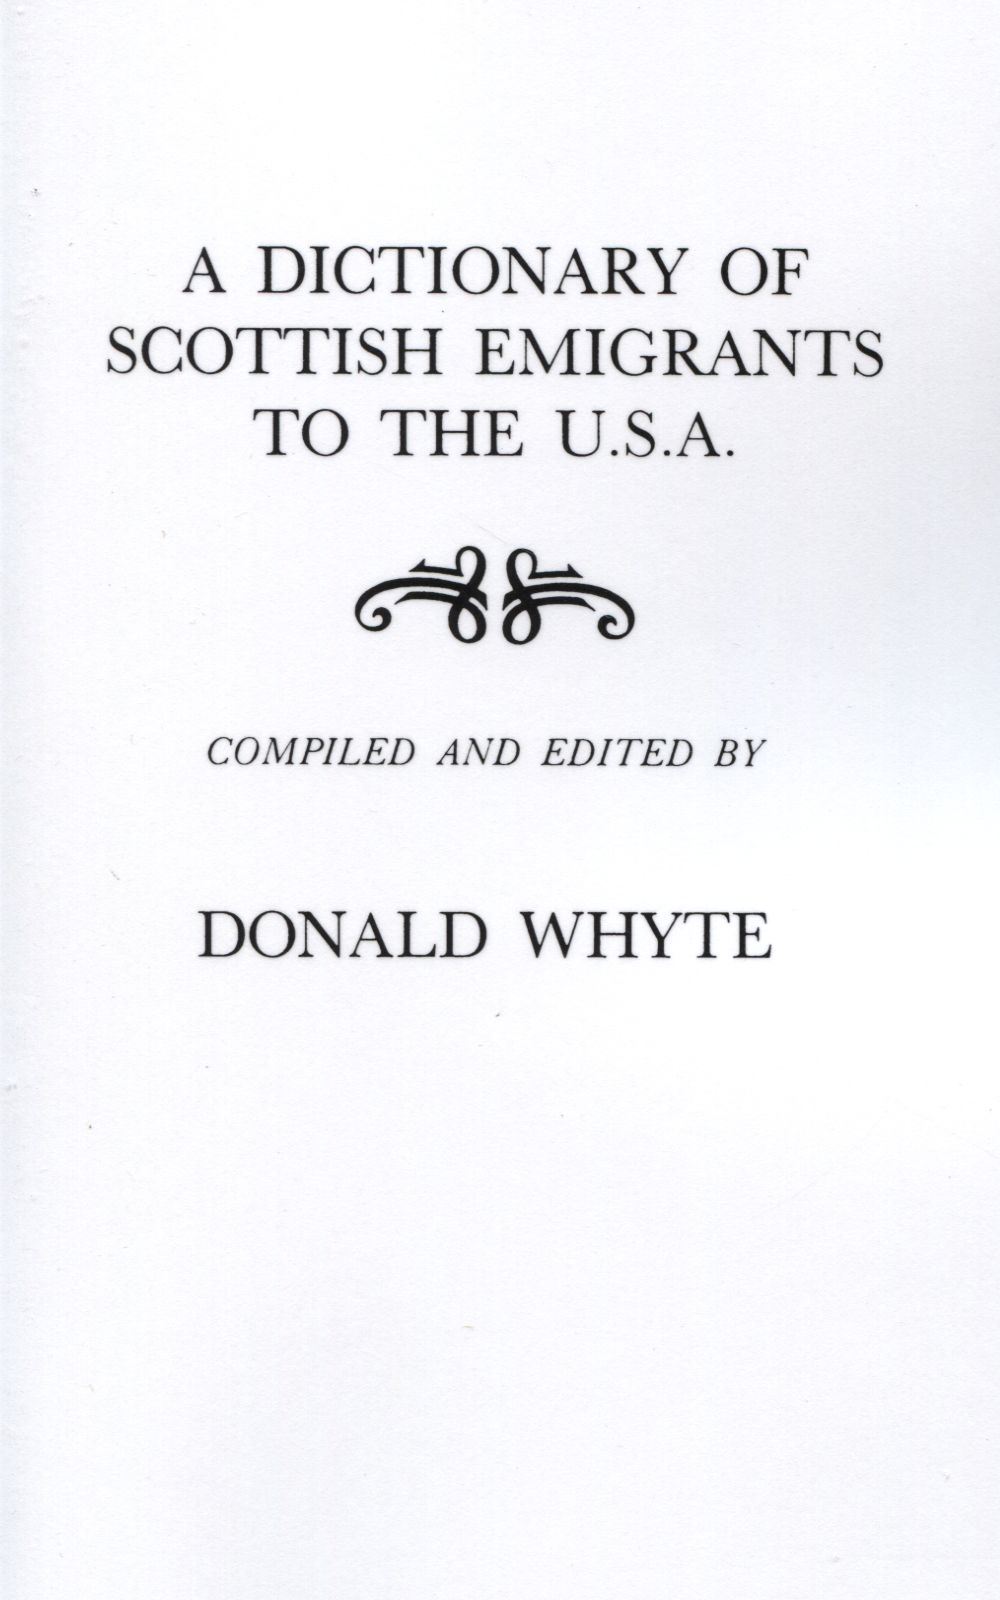 A Dictionary of Scottish Emigrants to the U.S.A.